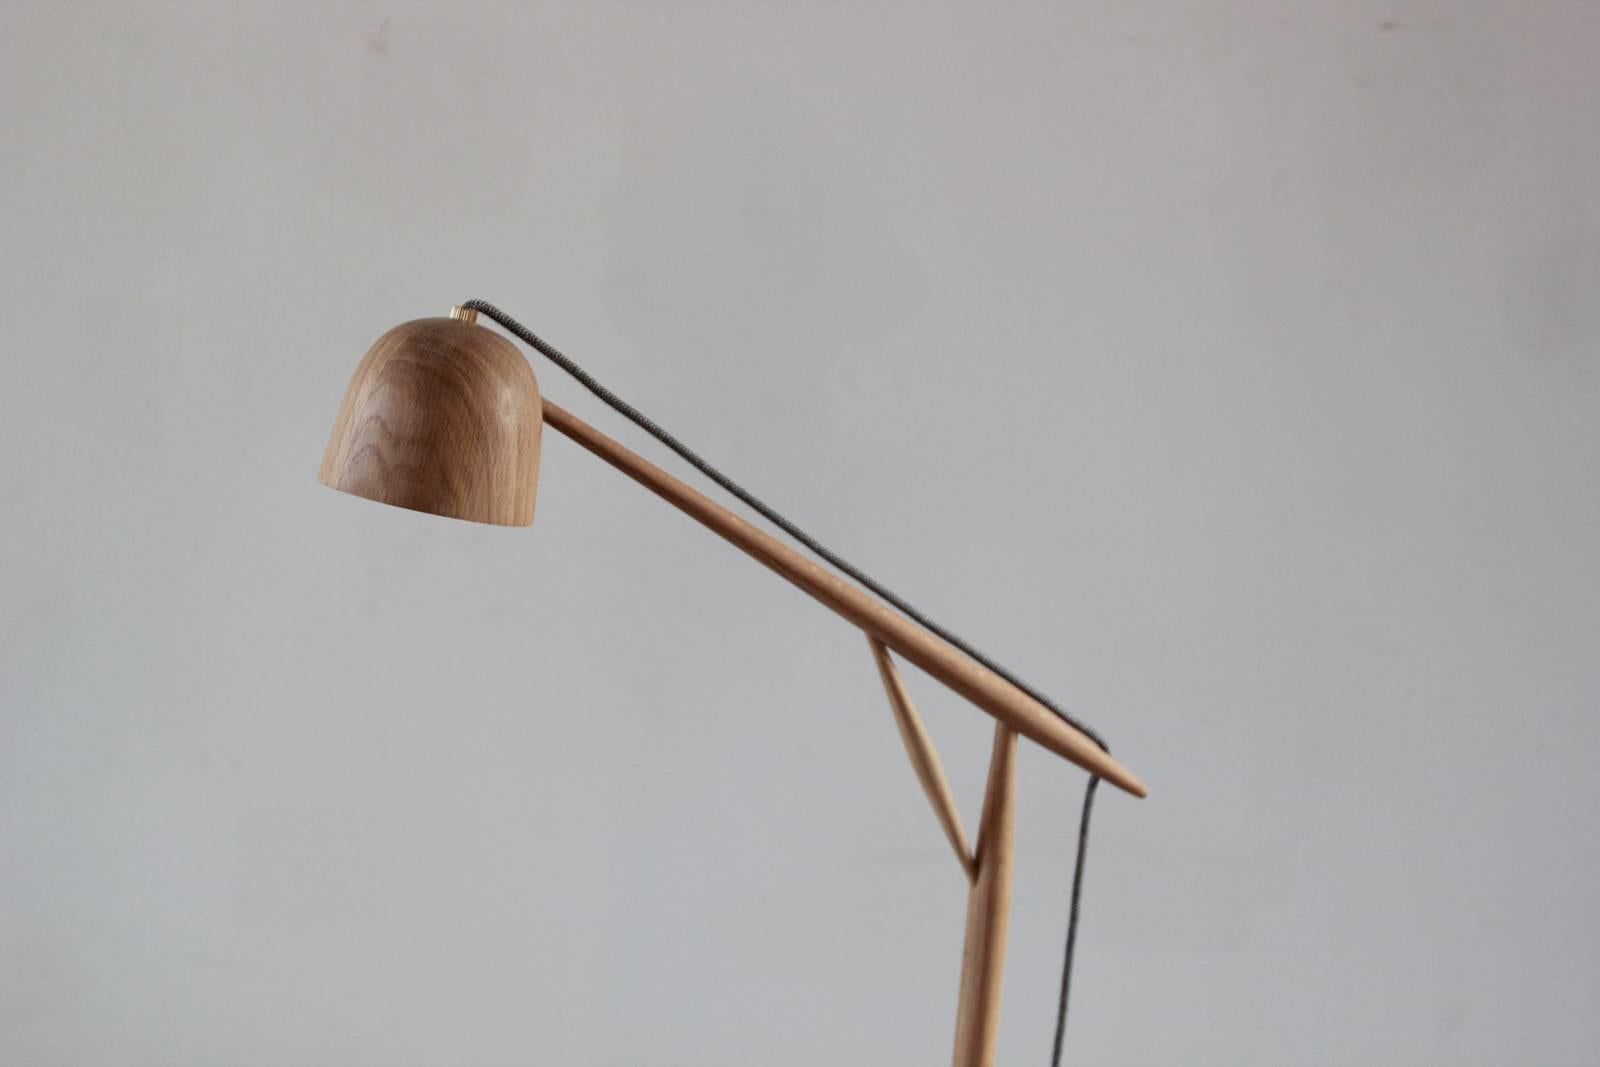 The white oak Crane Floor lamp displays delicate components that celebrate the best qualities of wood craftsmanship. The grain texture stems from the careful and deliberate process of turned wood fabrication. The lamp has a seamless angular design,